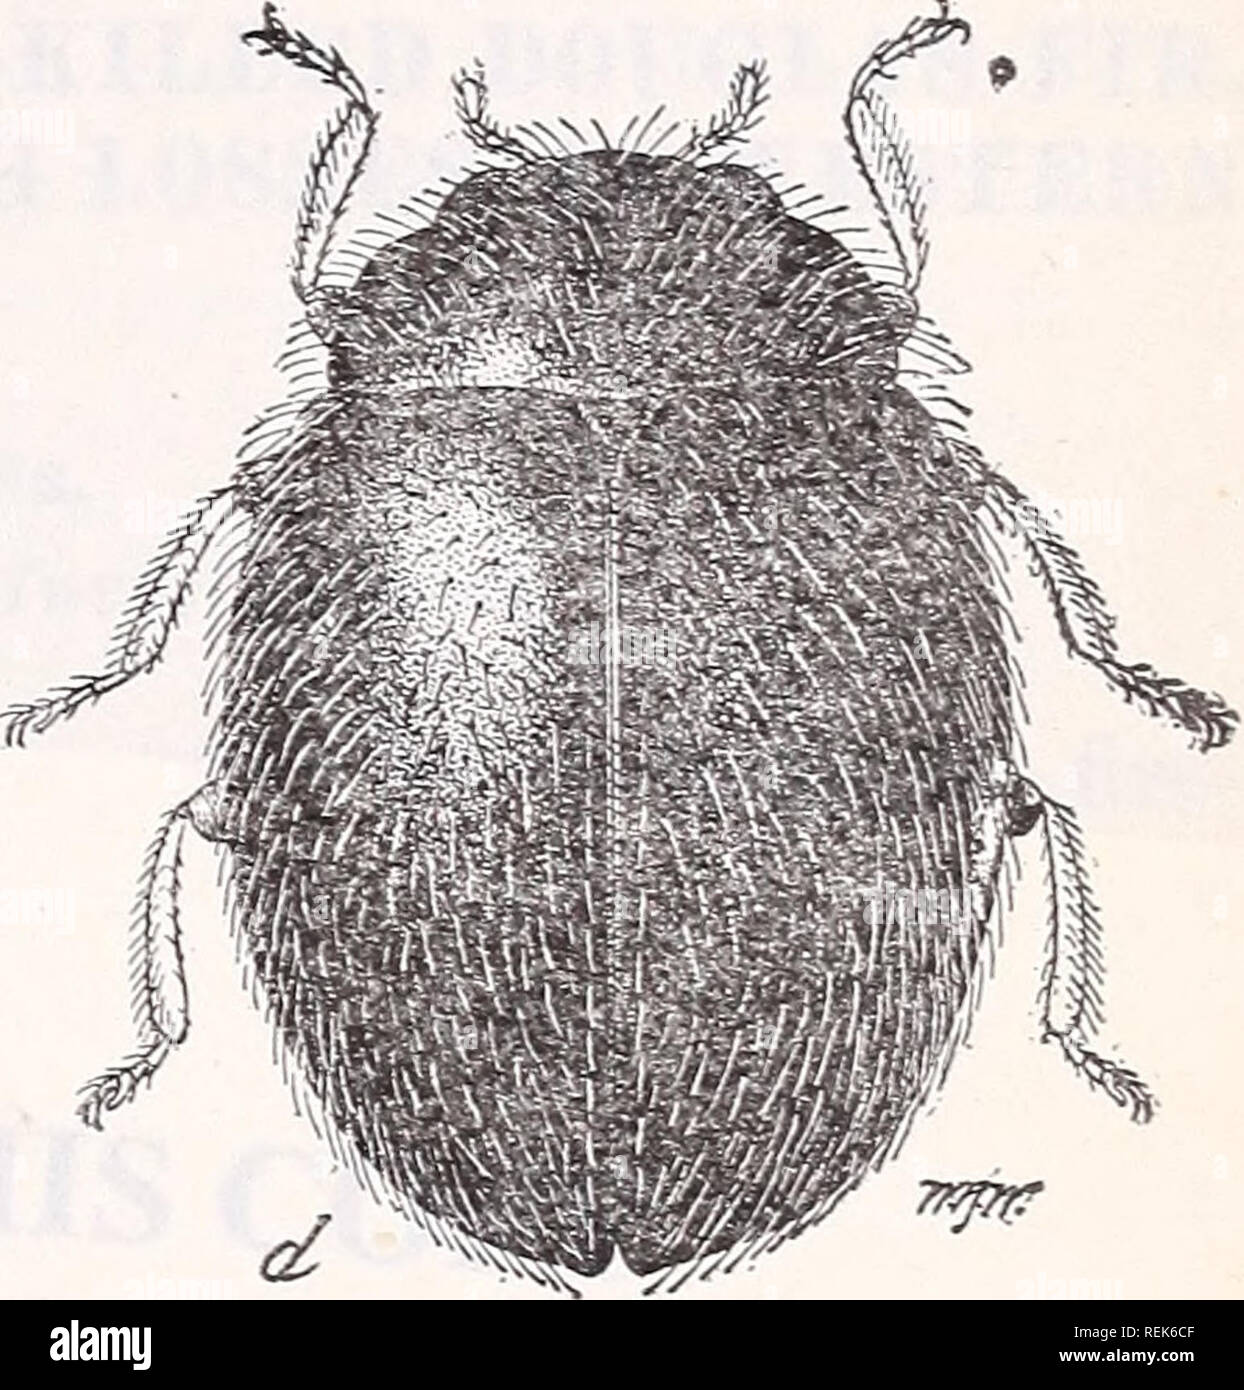 . The clover mite. (Bryobia pratensis Garman). Clover Diseases and pests; Bryobia praetiosa; Insect pests. Fig. 3—Scymnus punctum3 a lady-beetle enemy of the clover mite: a, Egg; &amp;, larva; Cj pupa ; dj adult. All much enlarged, a, 6, c, Redrawn from Weldon ; d, original. the Scymnus and of lace-winged flies, it is not at all unlikely that- some of them prey upon the clover mite. Approved : James Wilson, Secretary of Agriculture. Washington, D. C, April 18, 1912. 1 Loc. cit., p. 12. ADDITIONAL COPIES of this publication -£x may be procured from the Superintend- ent of Documents, Government  Stock Photo